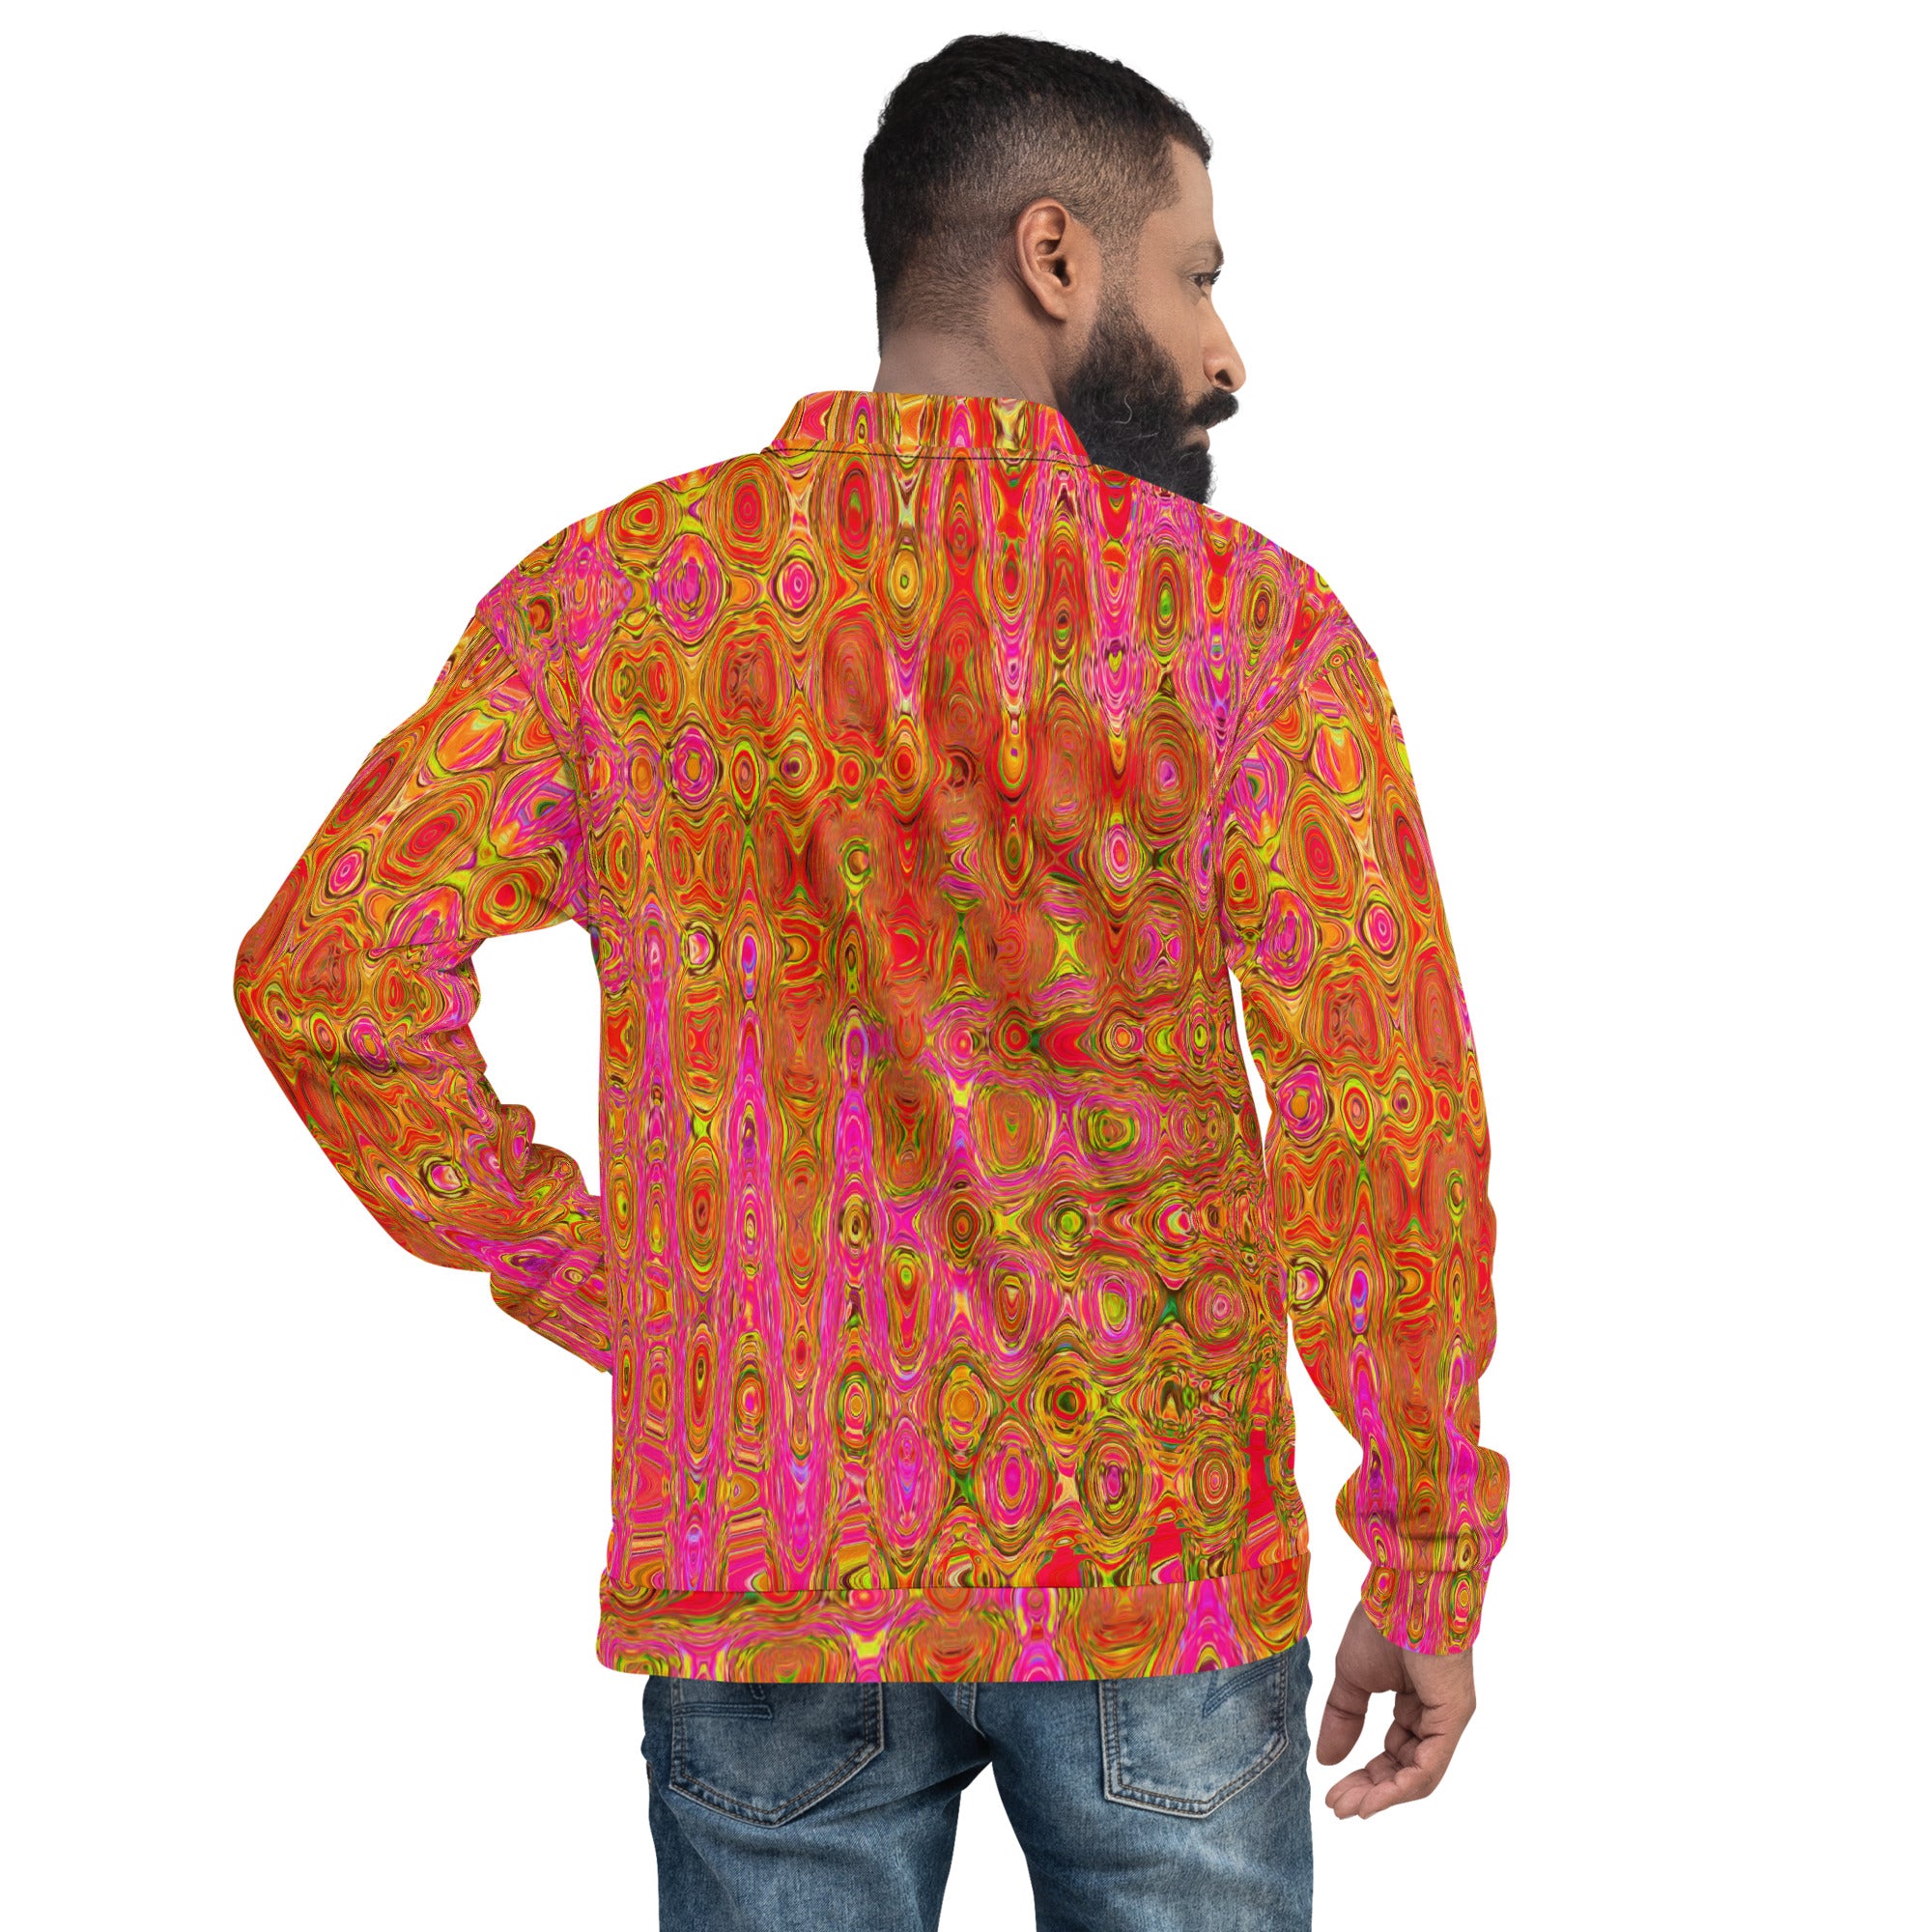 Unisex Bomber Jacket | Cool Abstract Red and Yellow Atomic Retro Zigzags